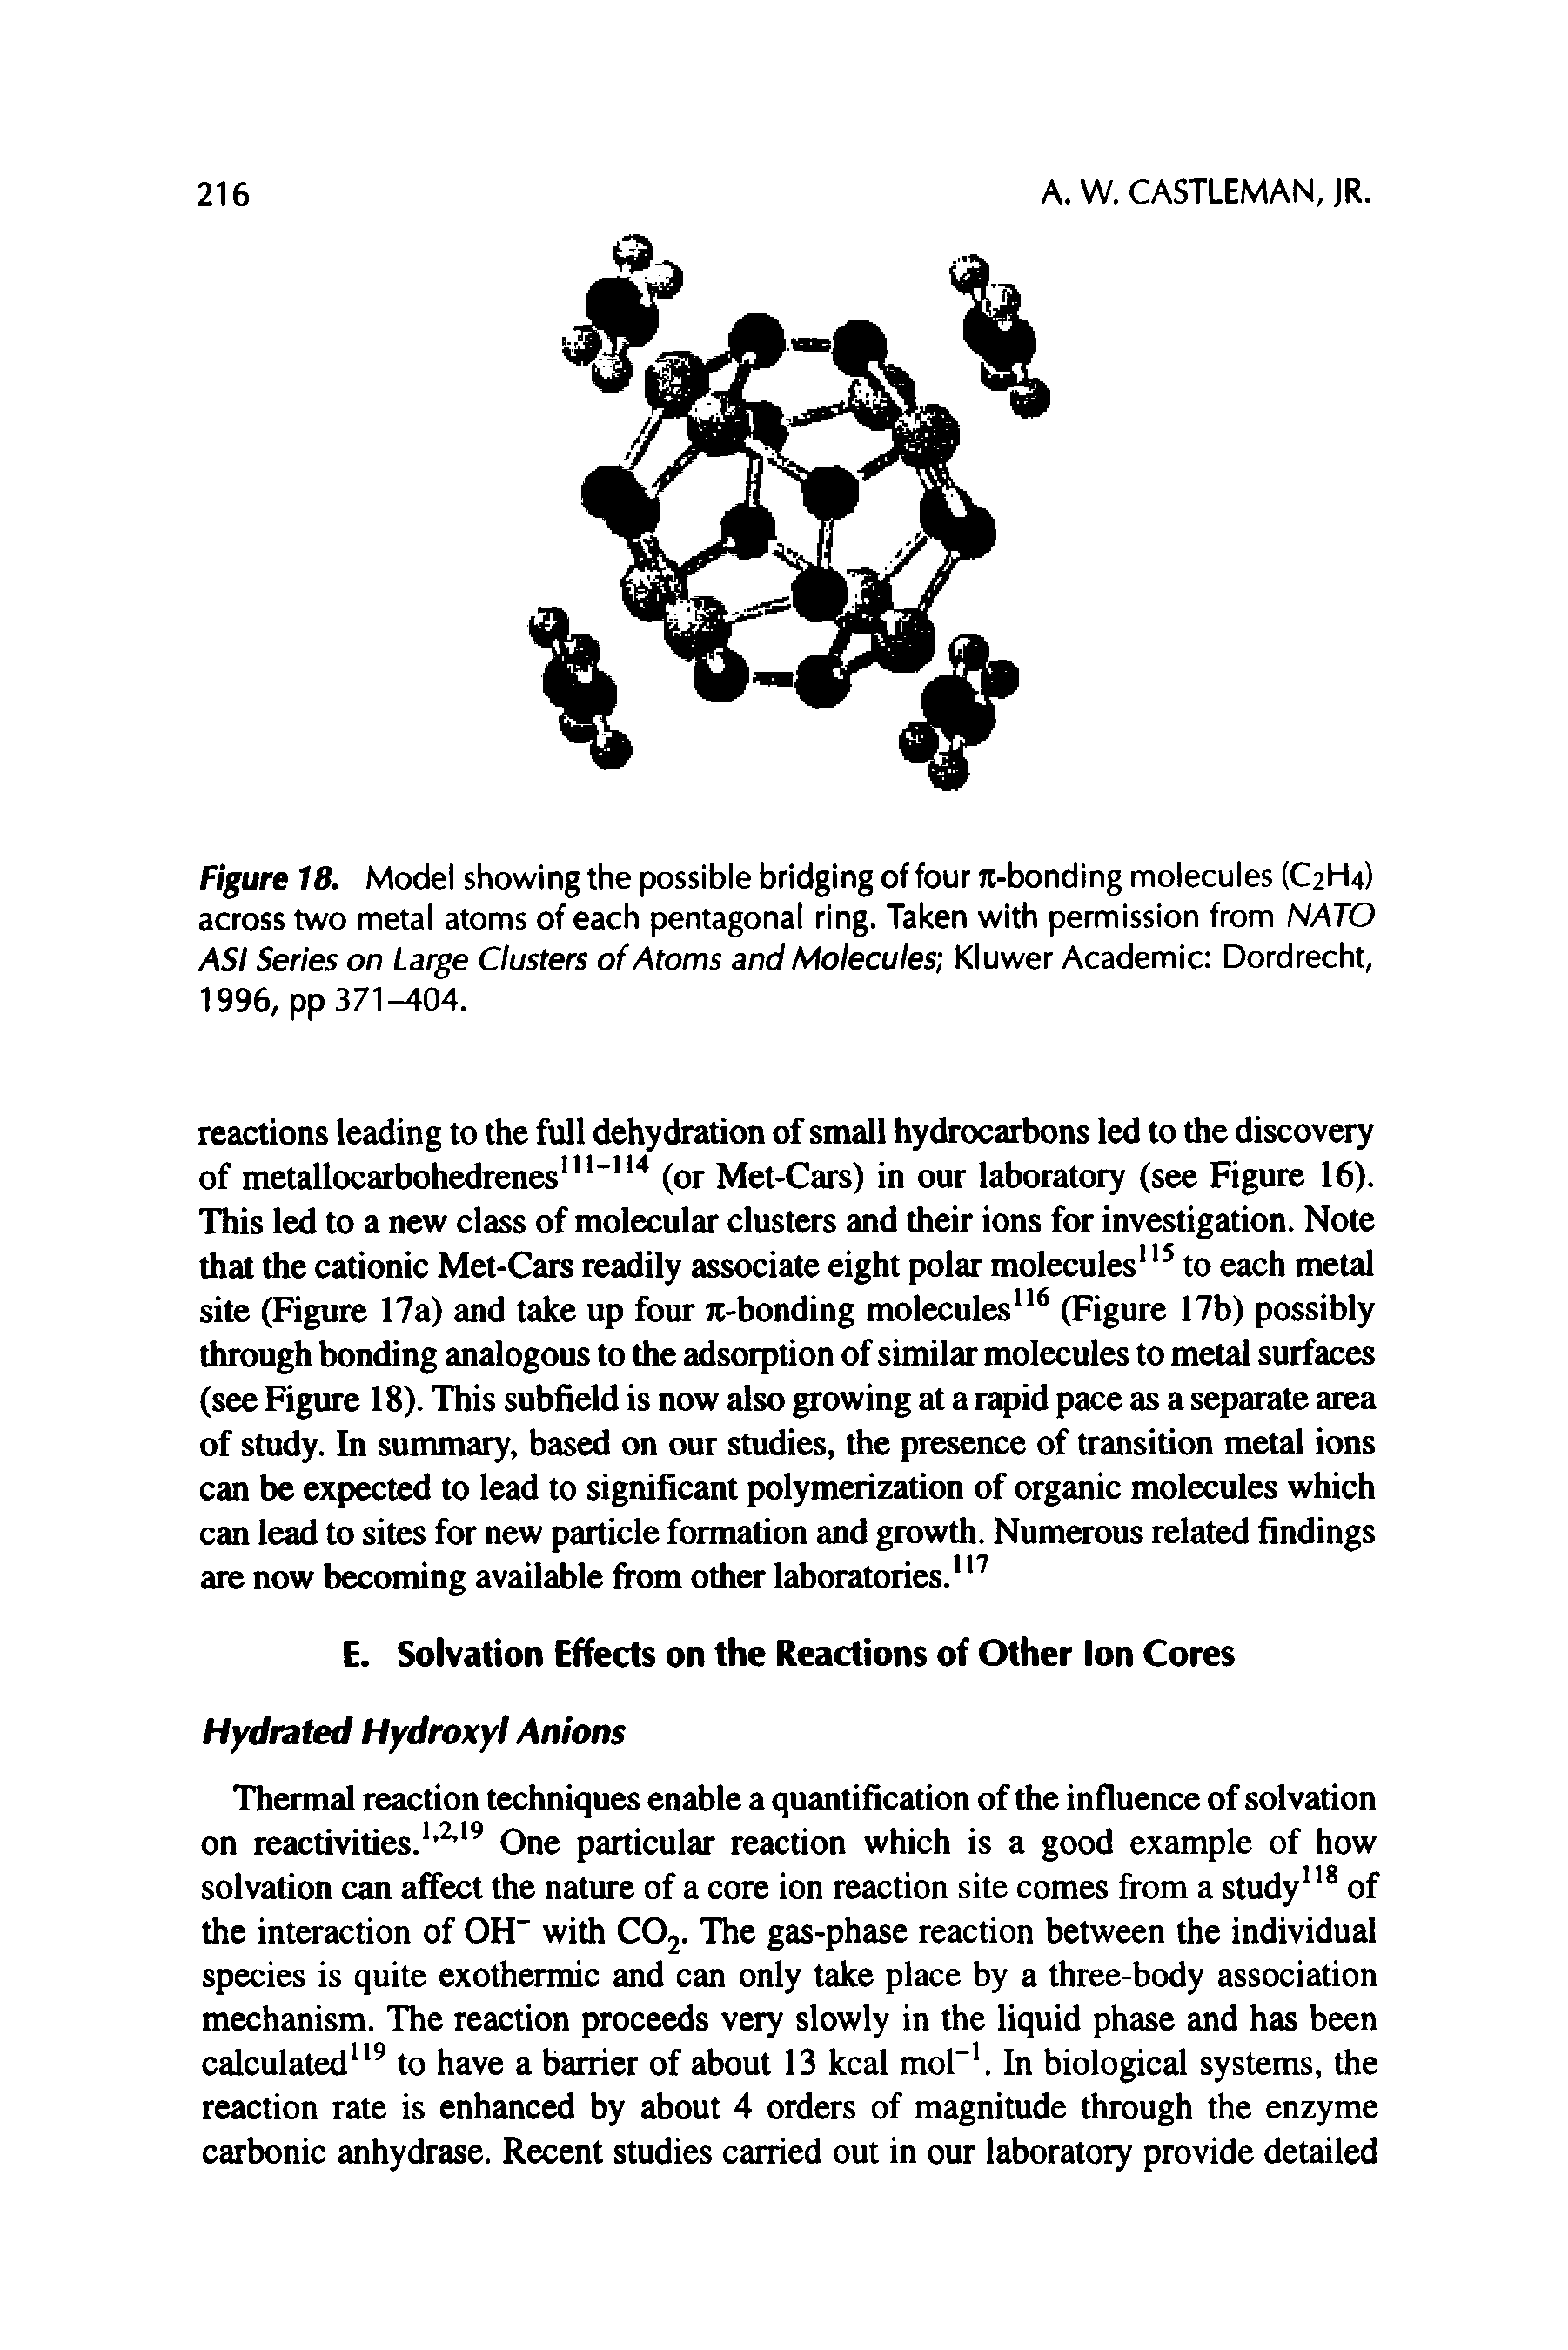 Figure 18. Model showing the possible bridging of four rc-bonding molecules (C2H4) across two metal atoms of each pentagonal ring. Taken with permission from NATO ASI Series on Large Clusters of Atoms and Molecules Kluwer Academic Dordrecht, 1996, pp 371-404.